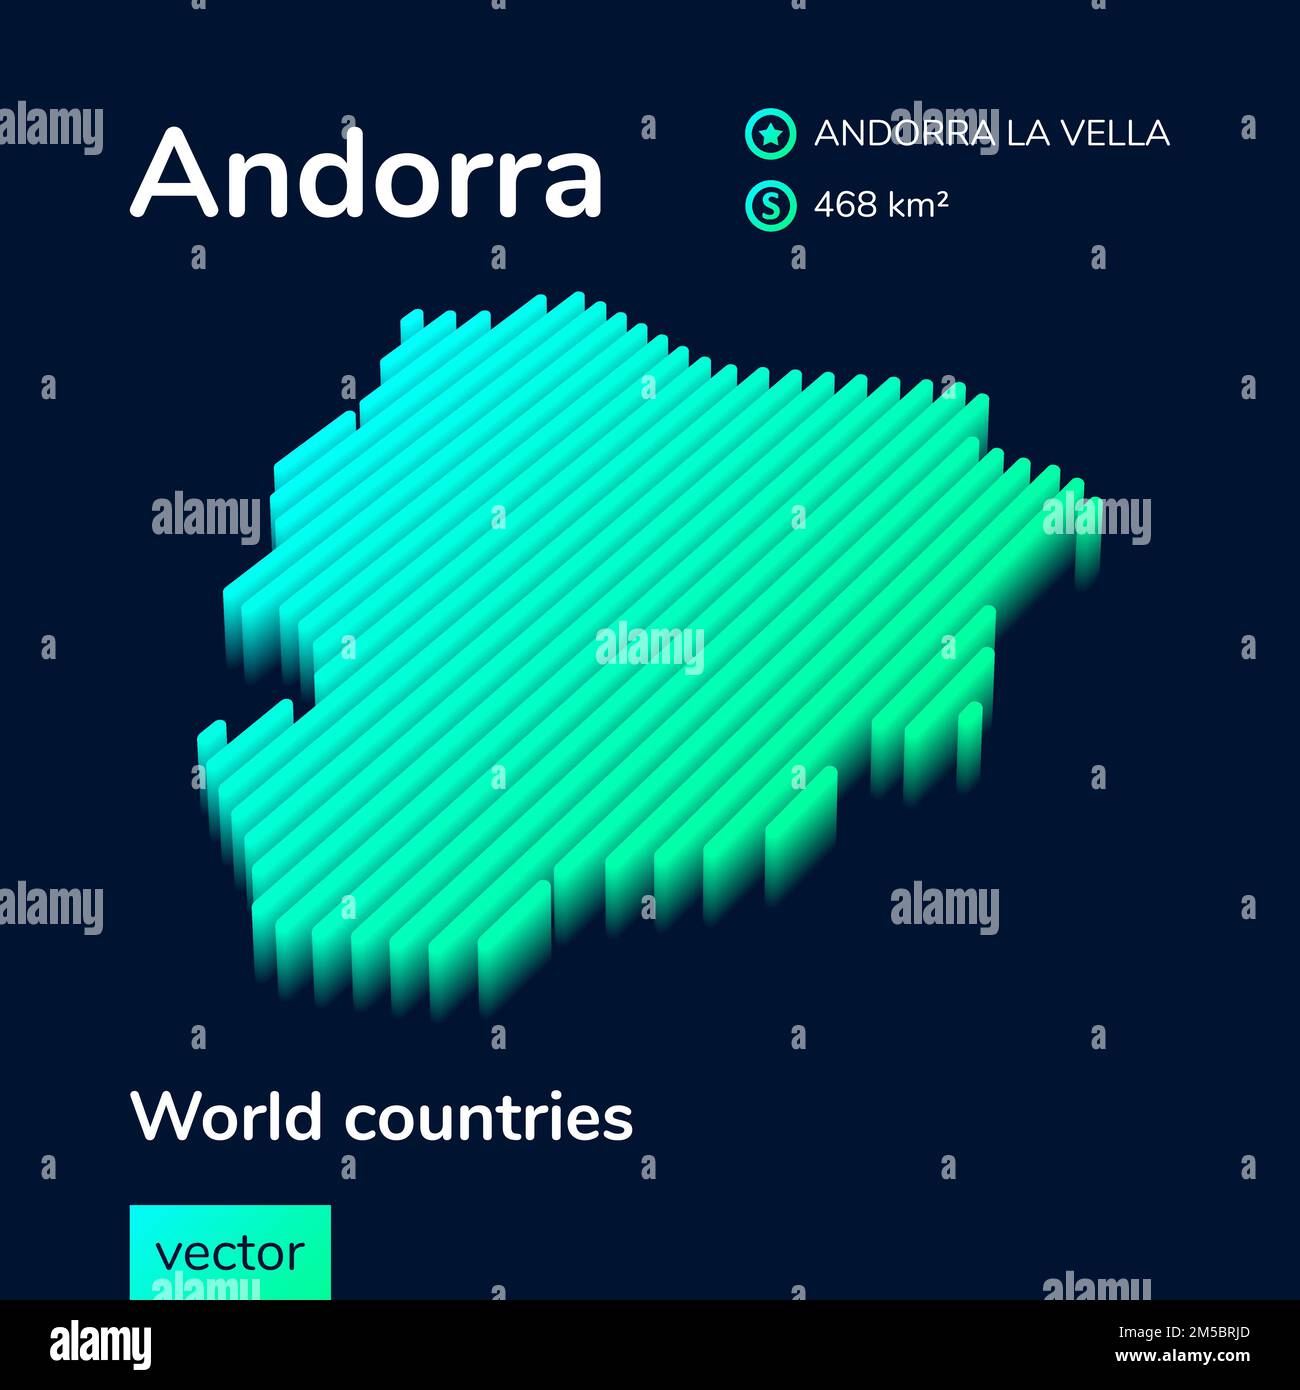 https://c8.alamy.com/comp/2M5BRJD/andorra-3d-map-stylized-neon-digital-isometric-striped-vector-map-of-andorra-is-in-green-and-mint-colors-on-the-dark-blue-background-2M5BRJD.jpg